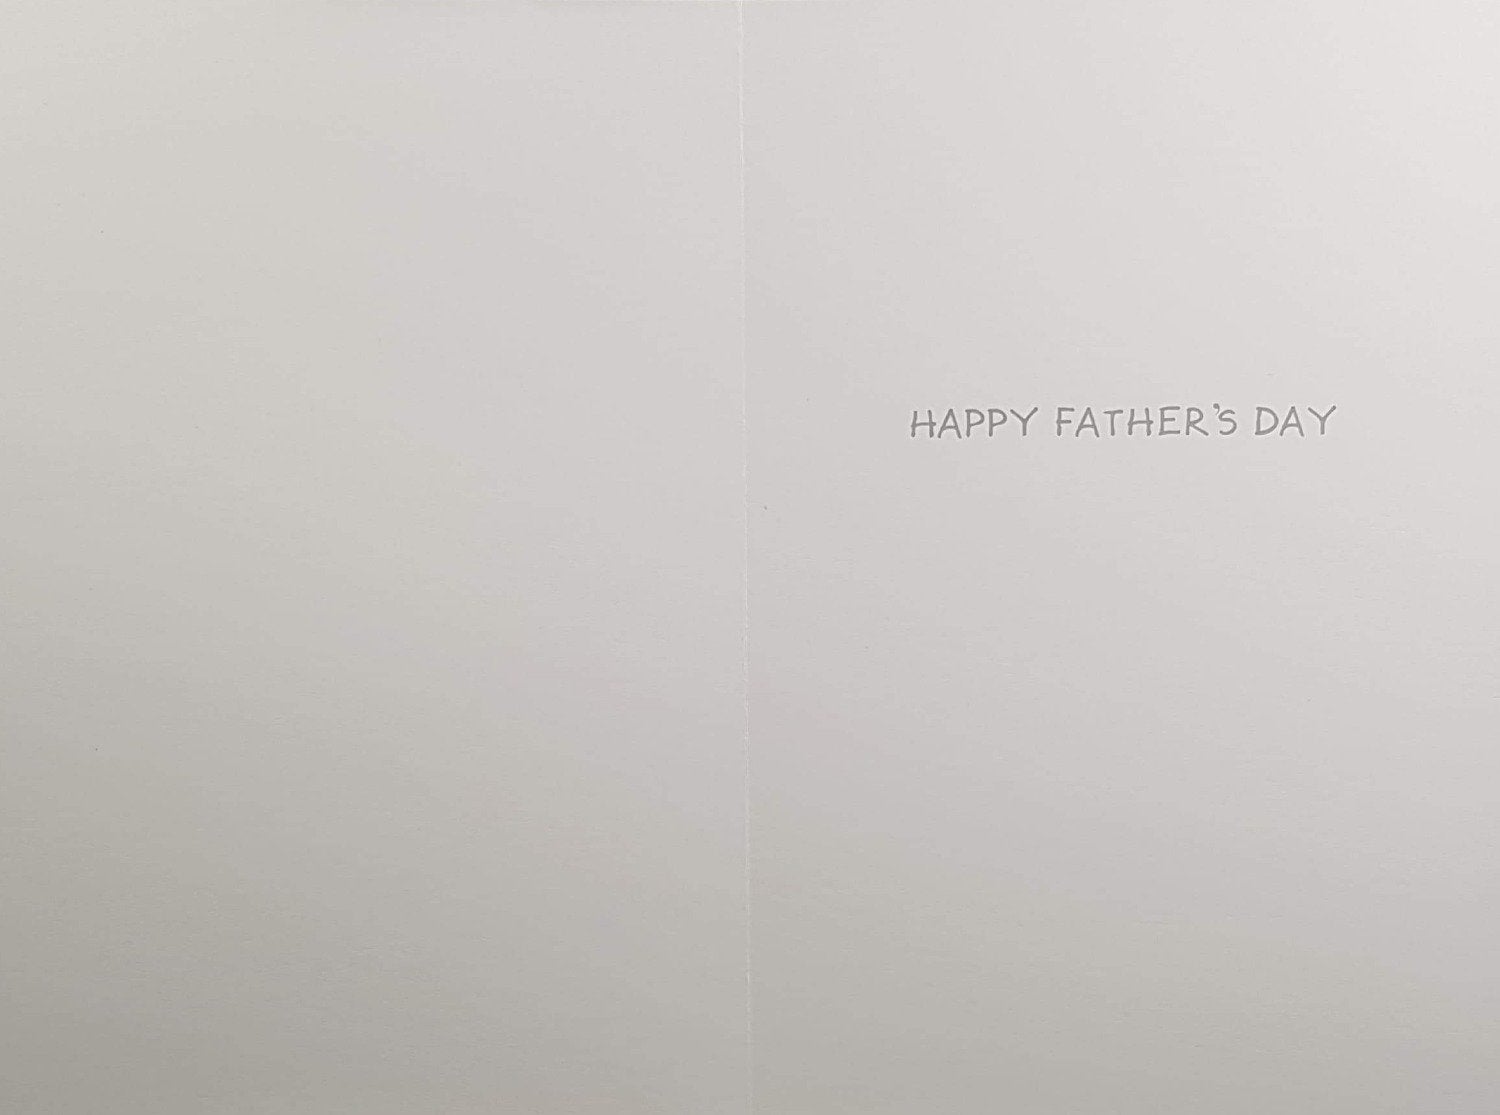 Fathers Day Card - Humour / Dad Trying To Installing The Printer